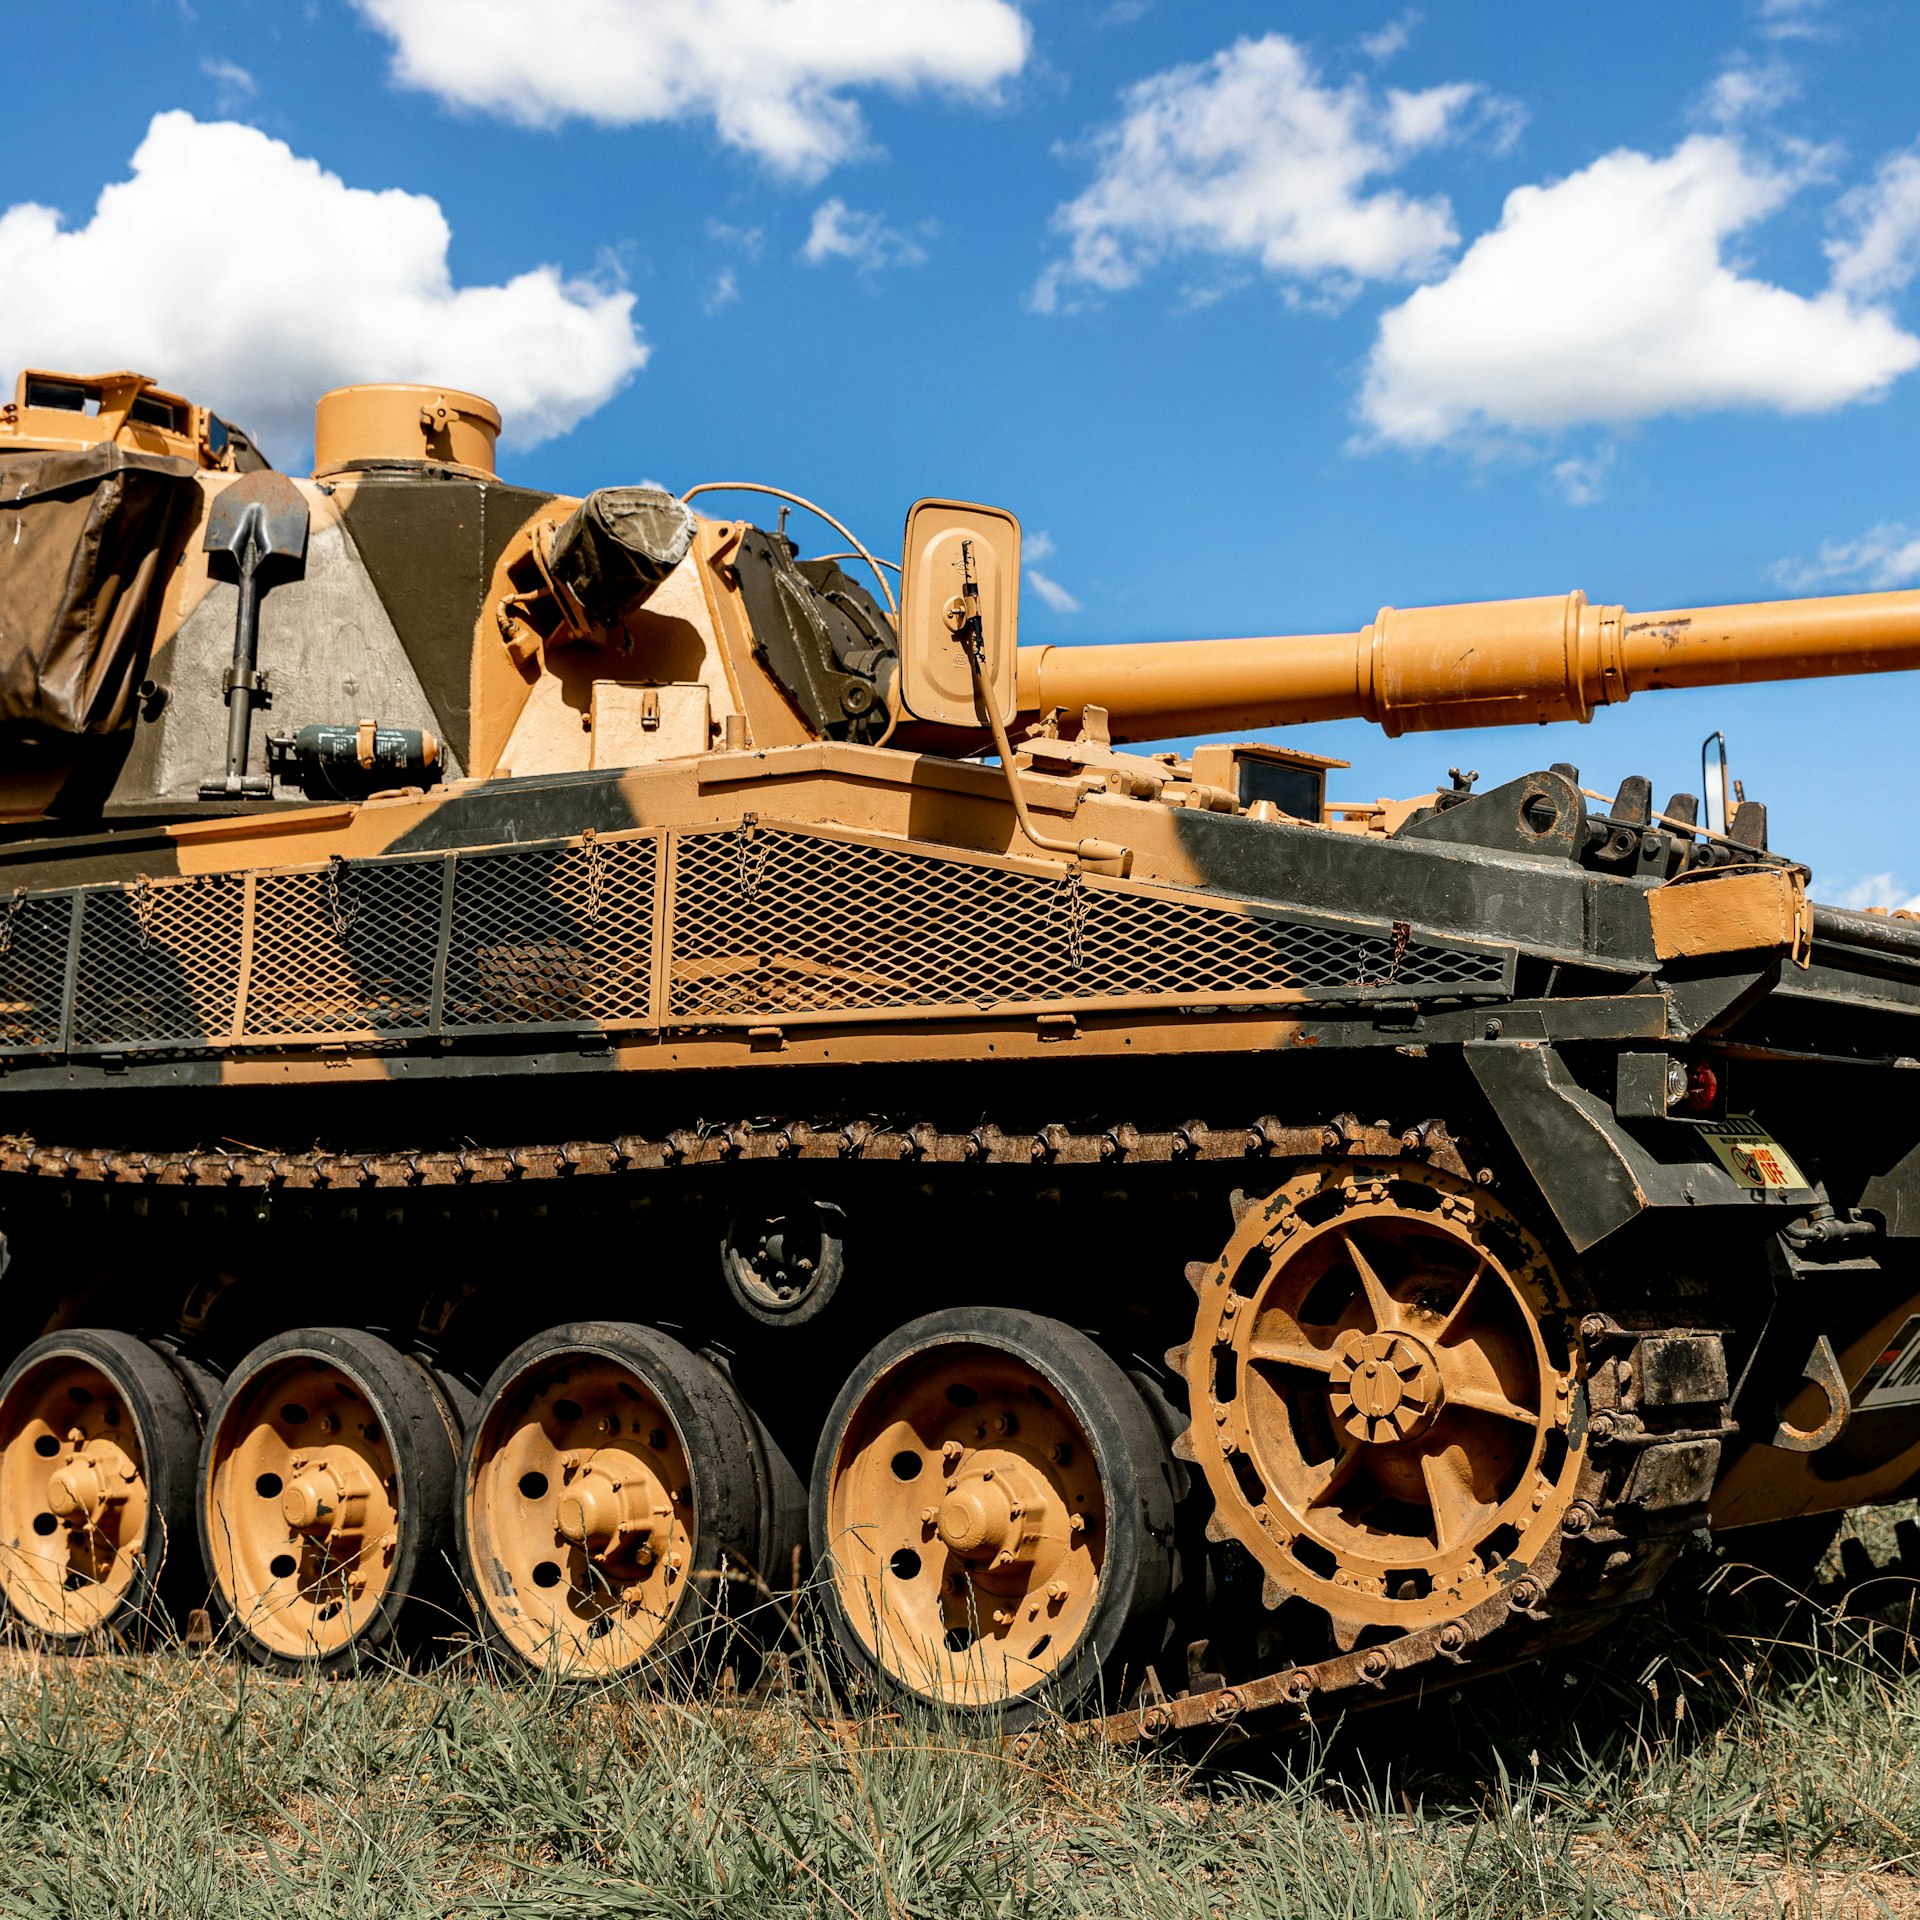 How To Drive A Tank: A Beginner's Guide